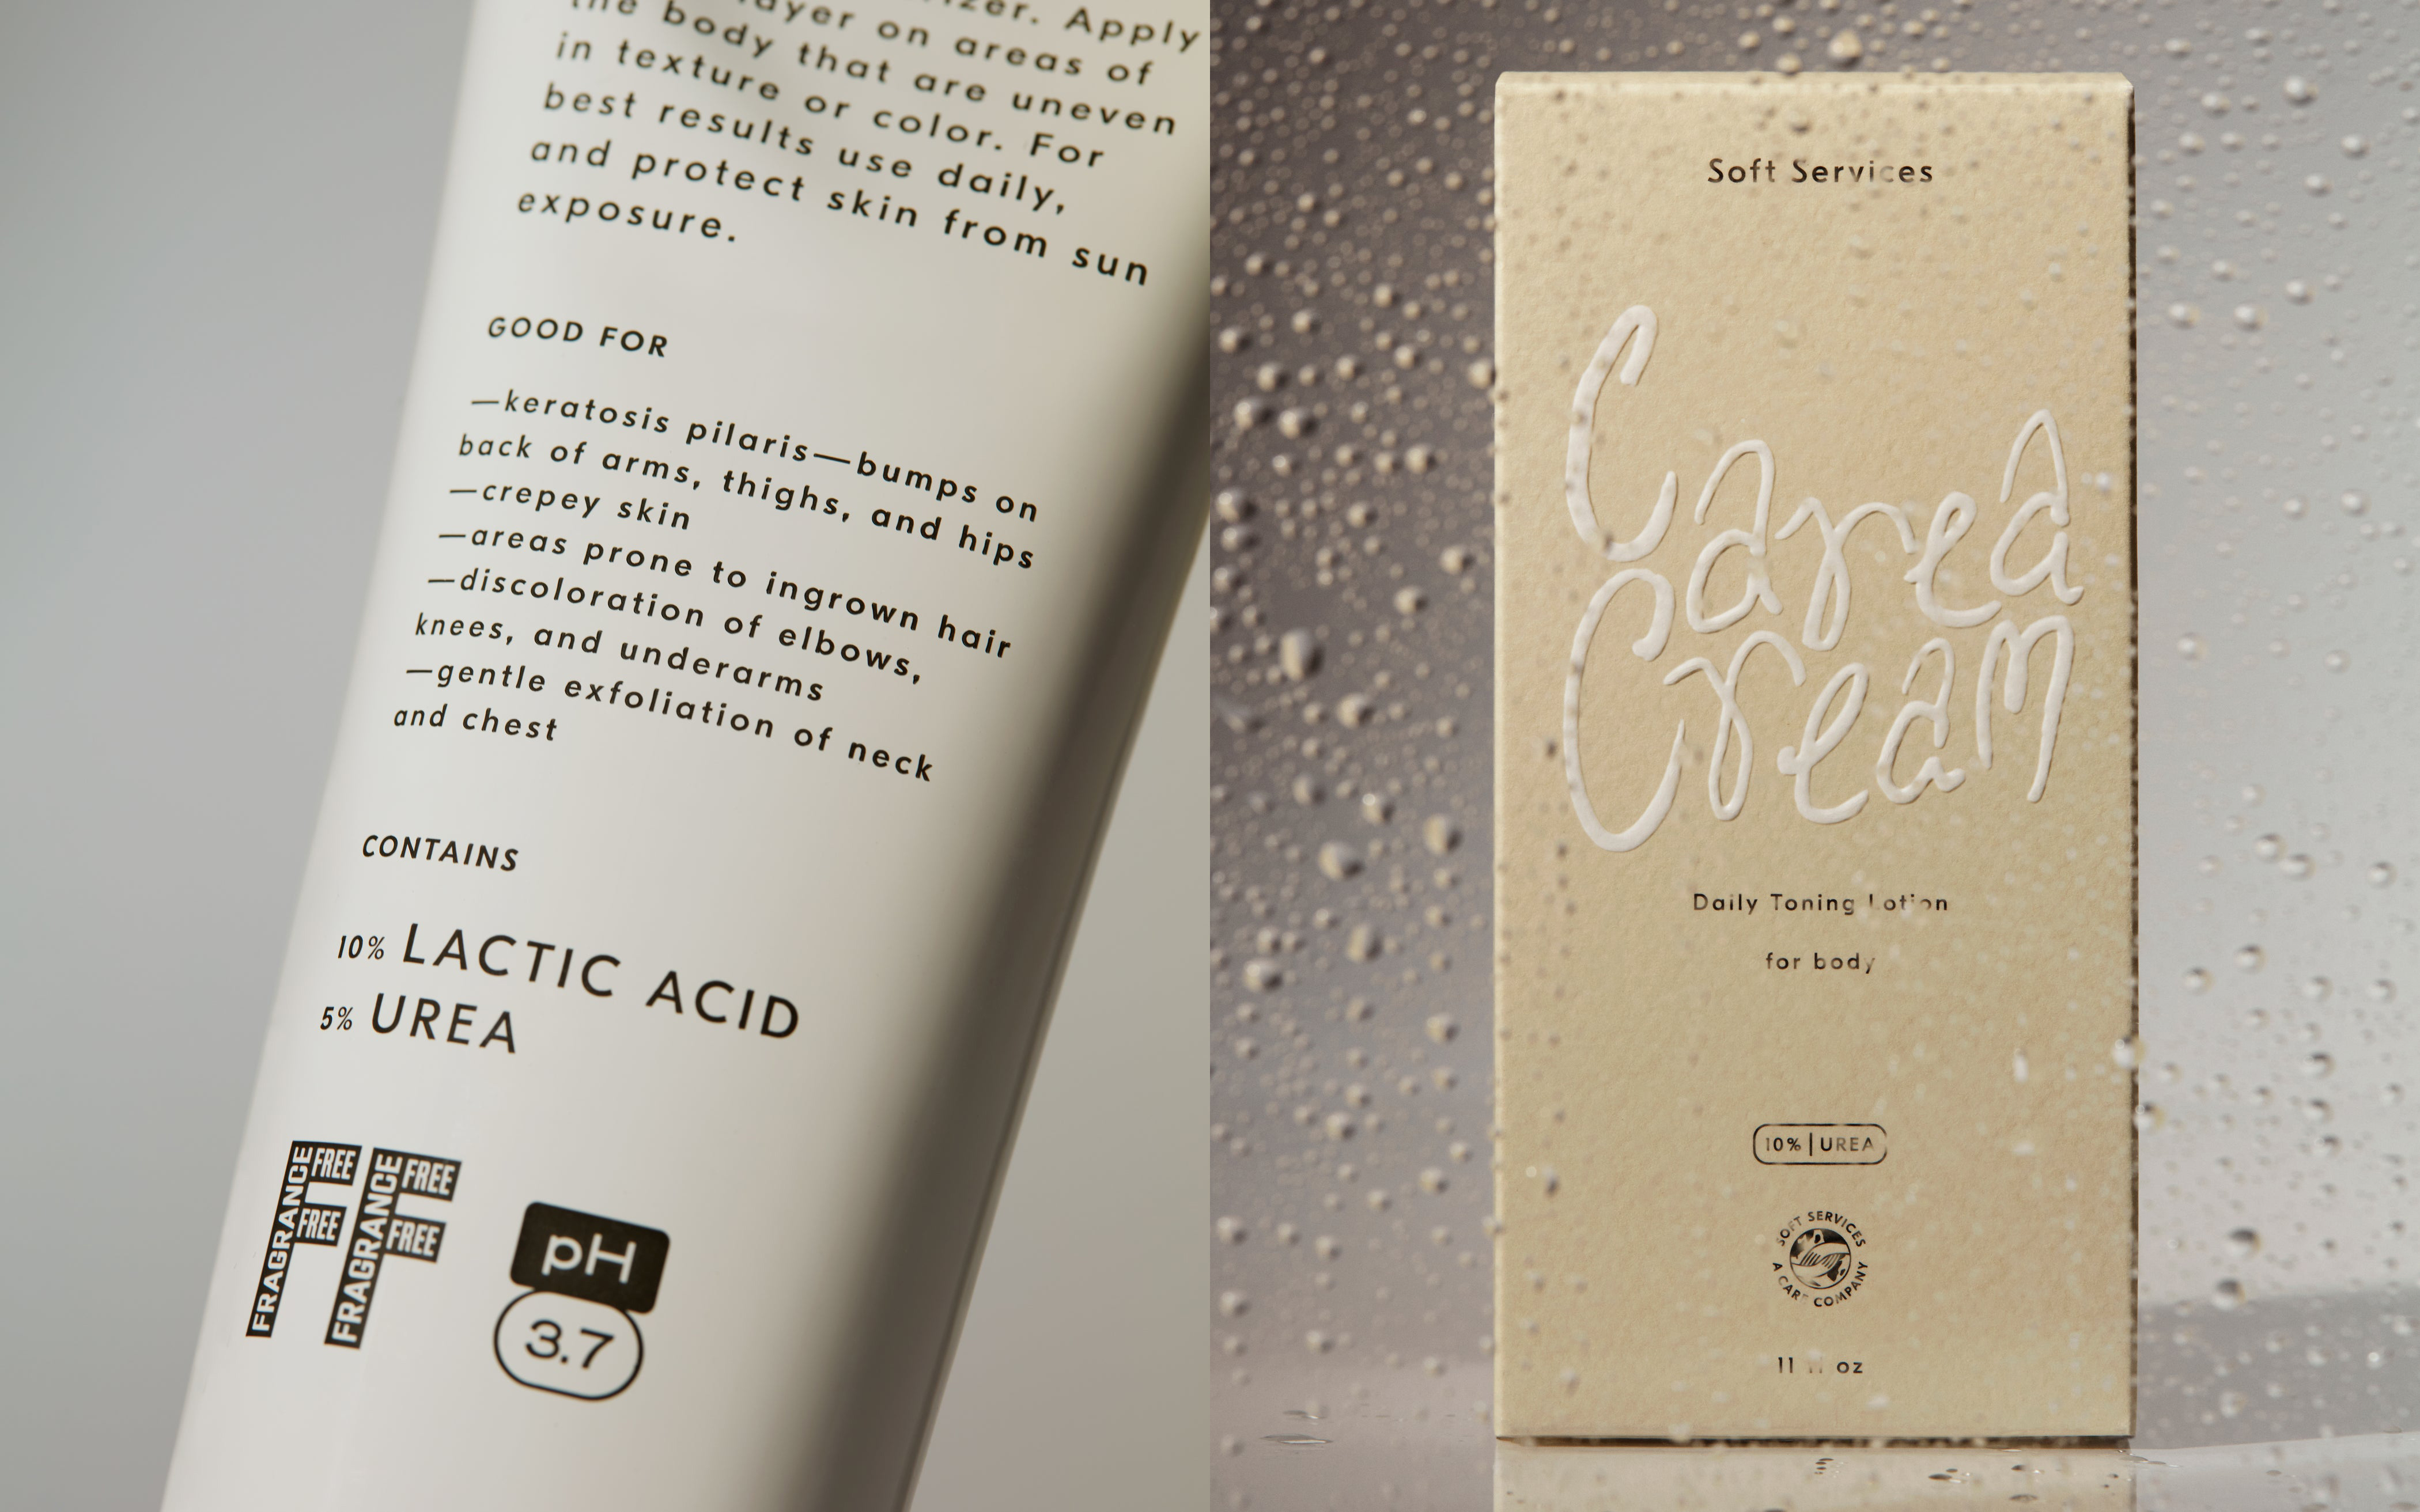 Screen printed tube and embossed packaging design by Decade for New York skincare brand Soft Services